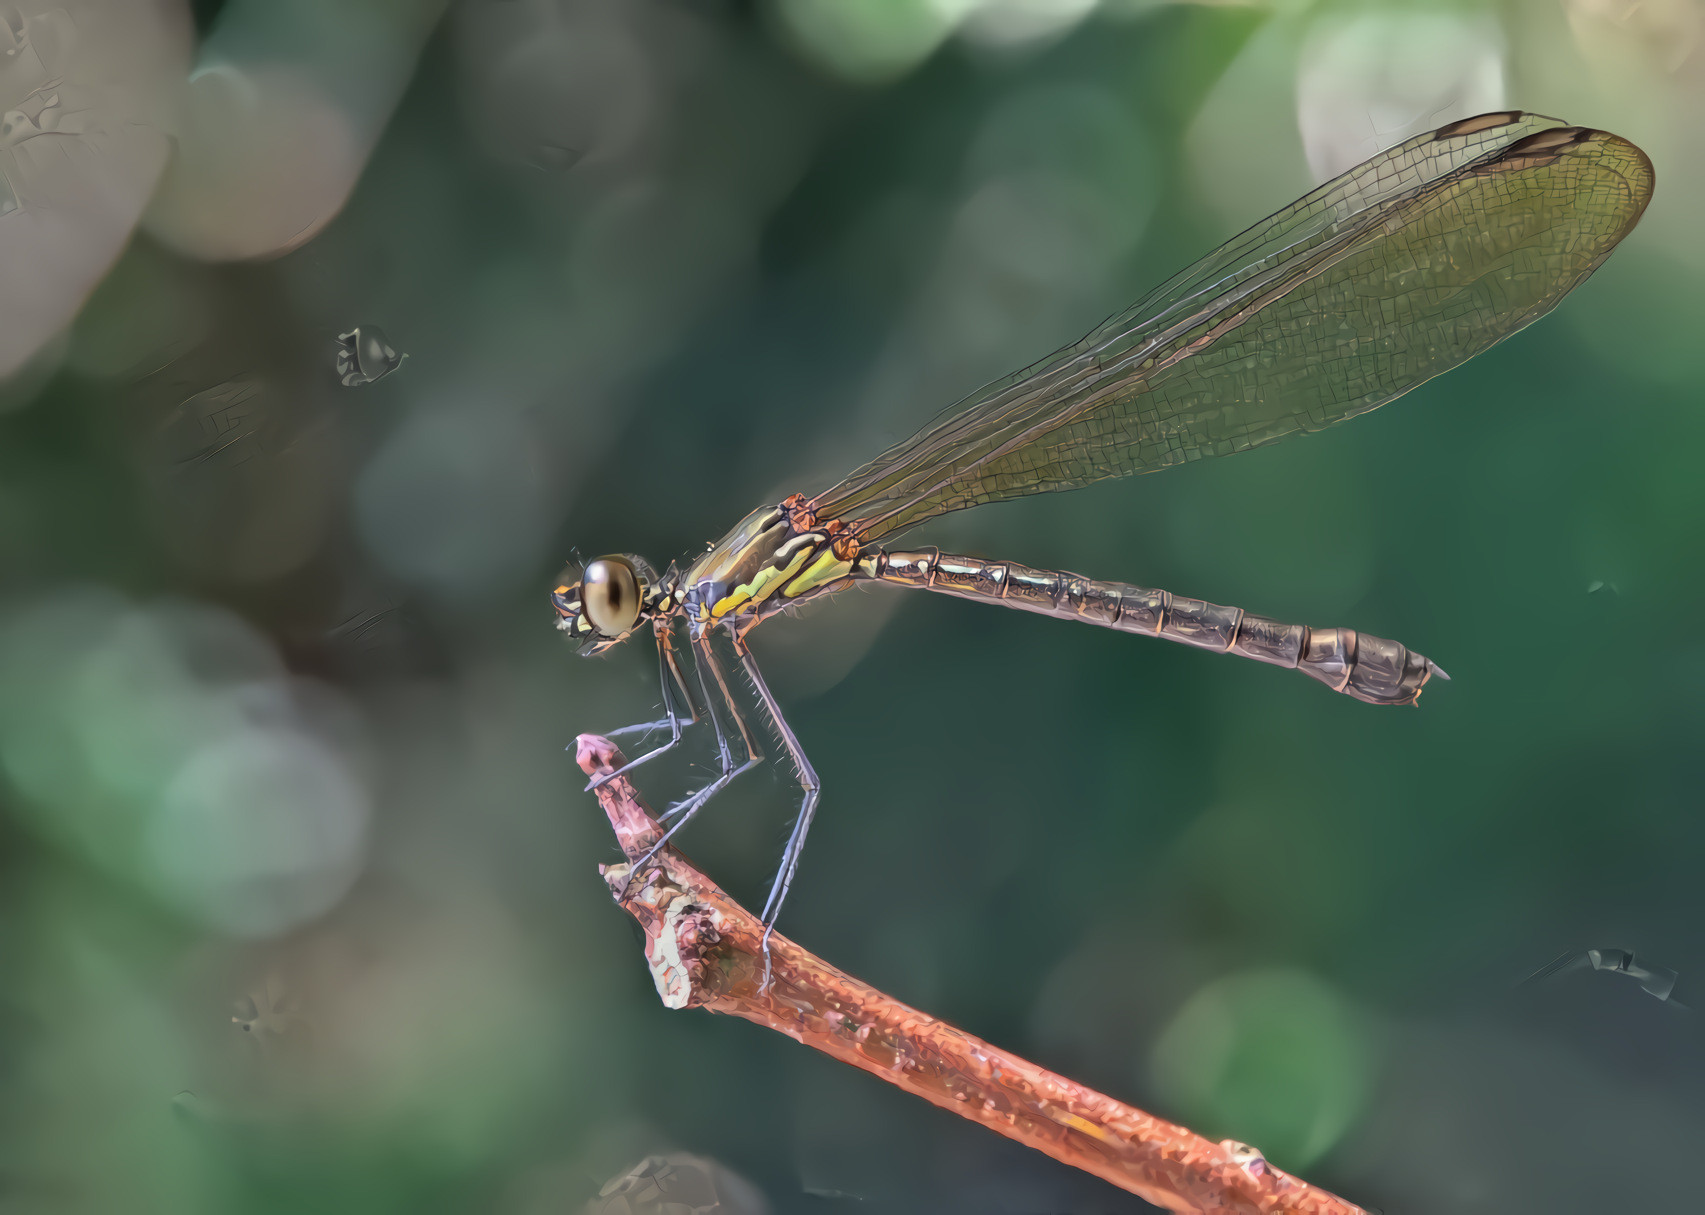 Dragonfly - What Big Eyes You Have!